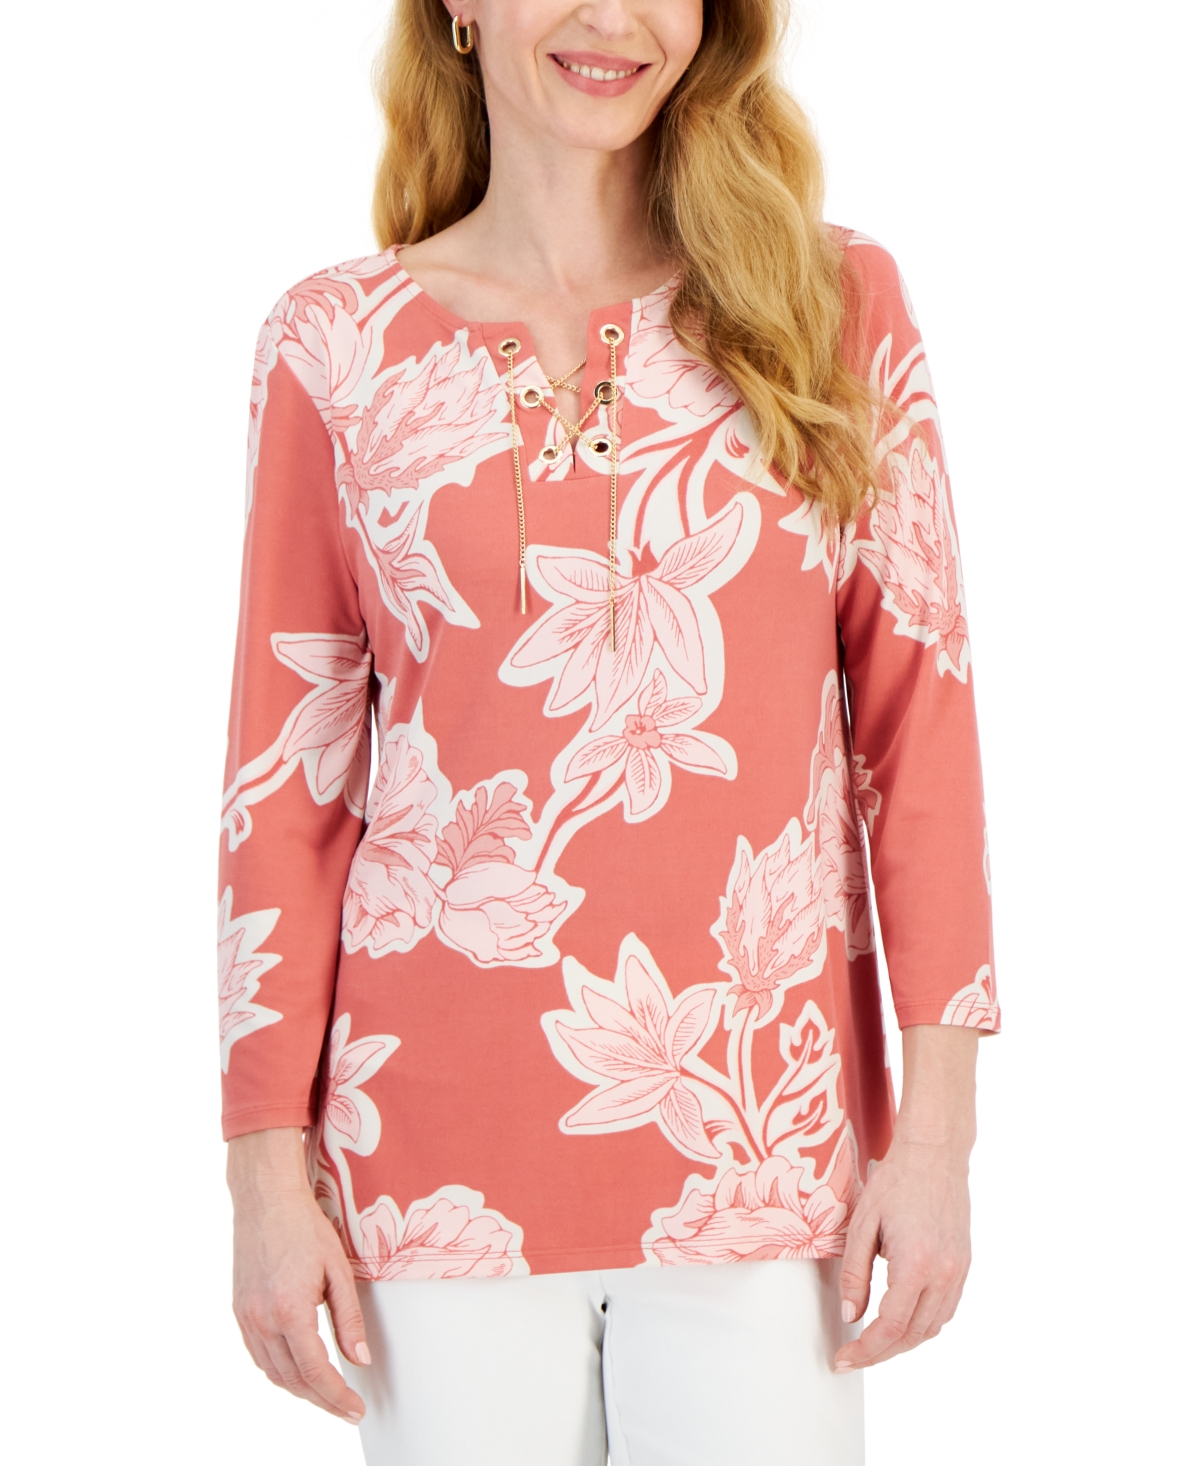 Women's 3/4 Sleeve Printed Chain Lace-Up Tunic, Created for Macy's - Peach Bliss